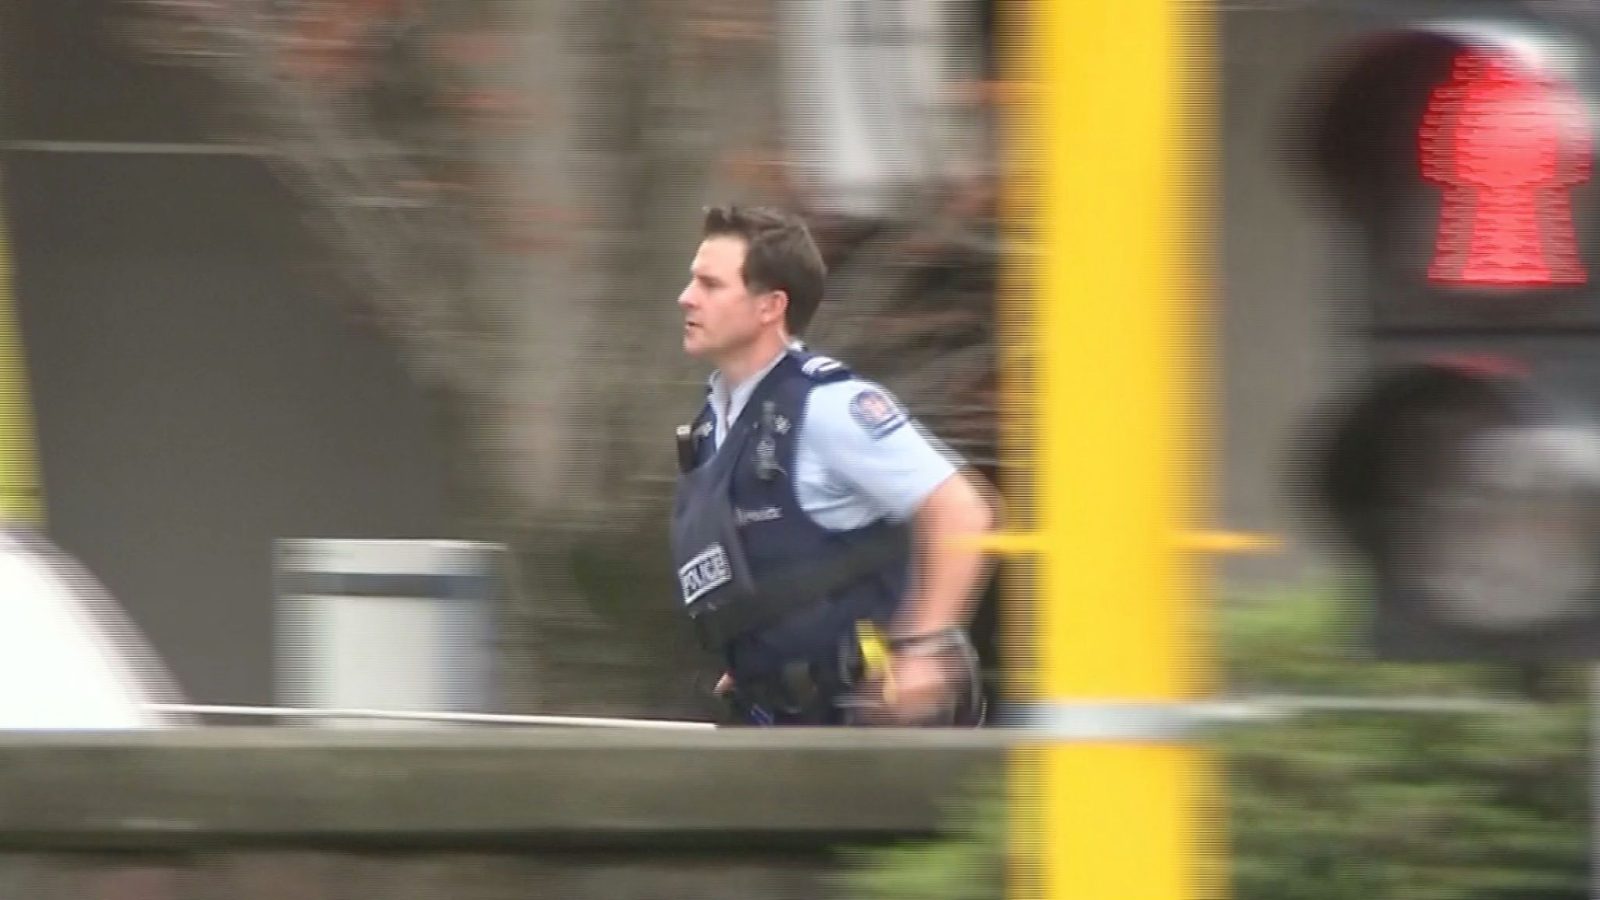 New Zealand shootings – footage removed by Facebook and YouTube